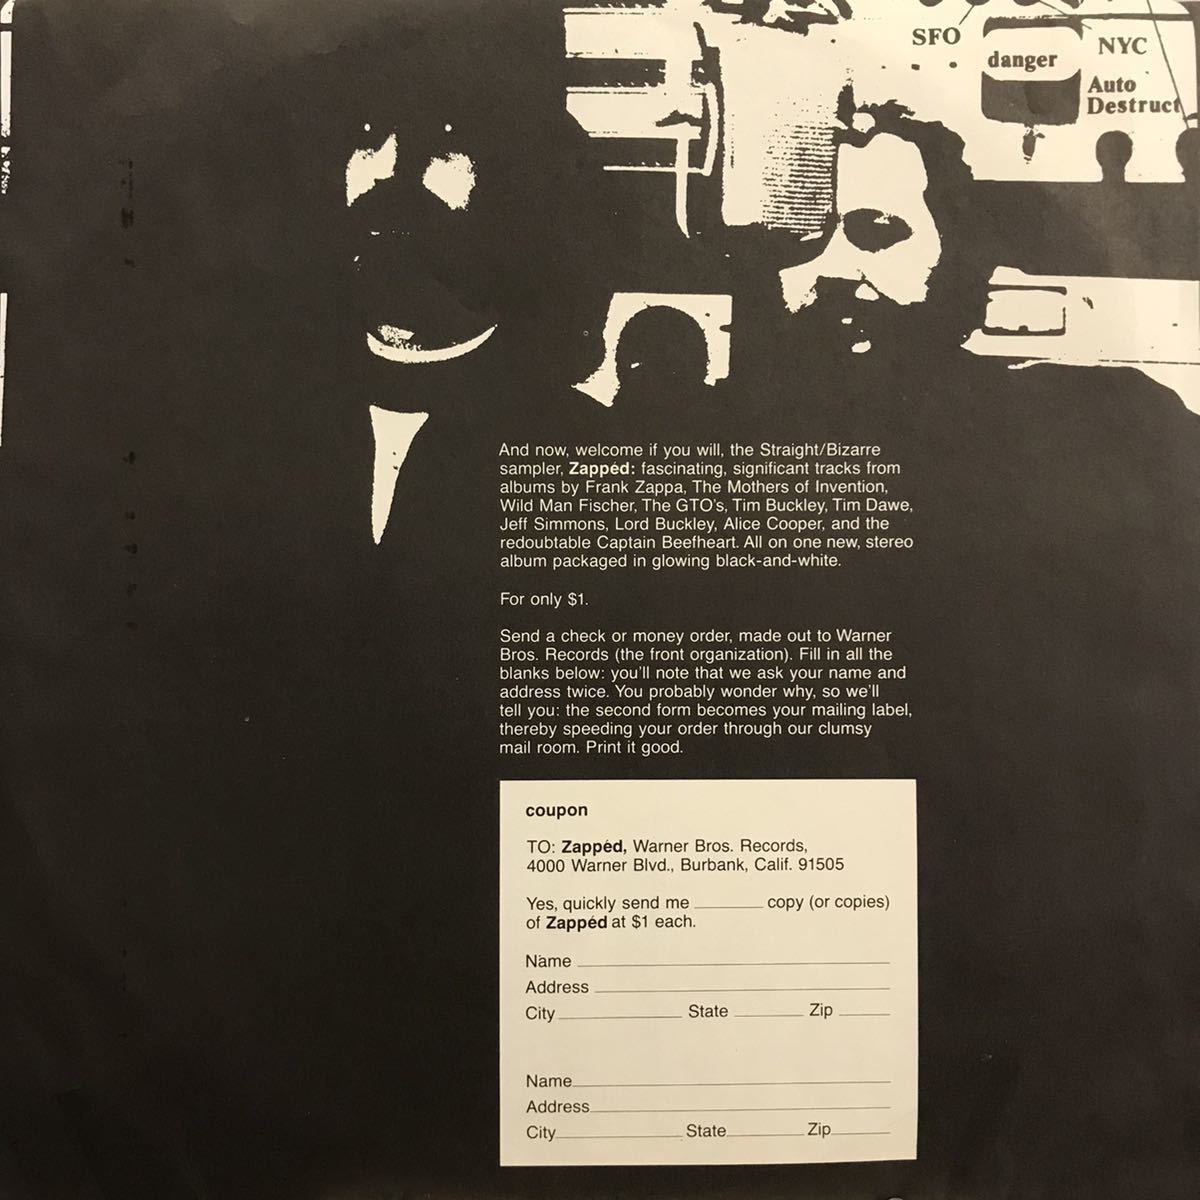 USオリジナル ほぼ美品 シュリンク付 LP Frank Zappa & The Mothers of Invention / Weasels Ripped My Flesh いたち野郎 MS 2028_画像5